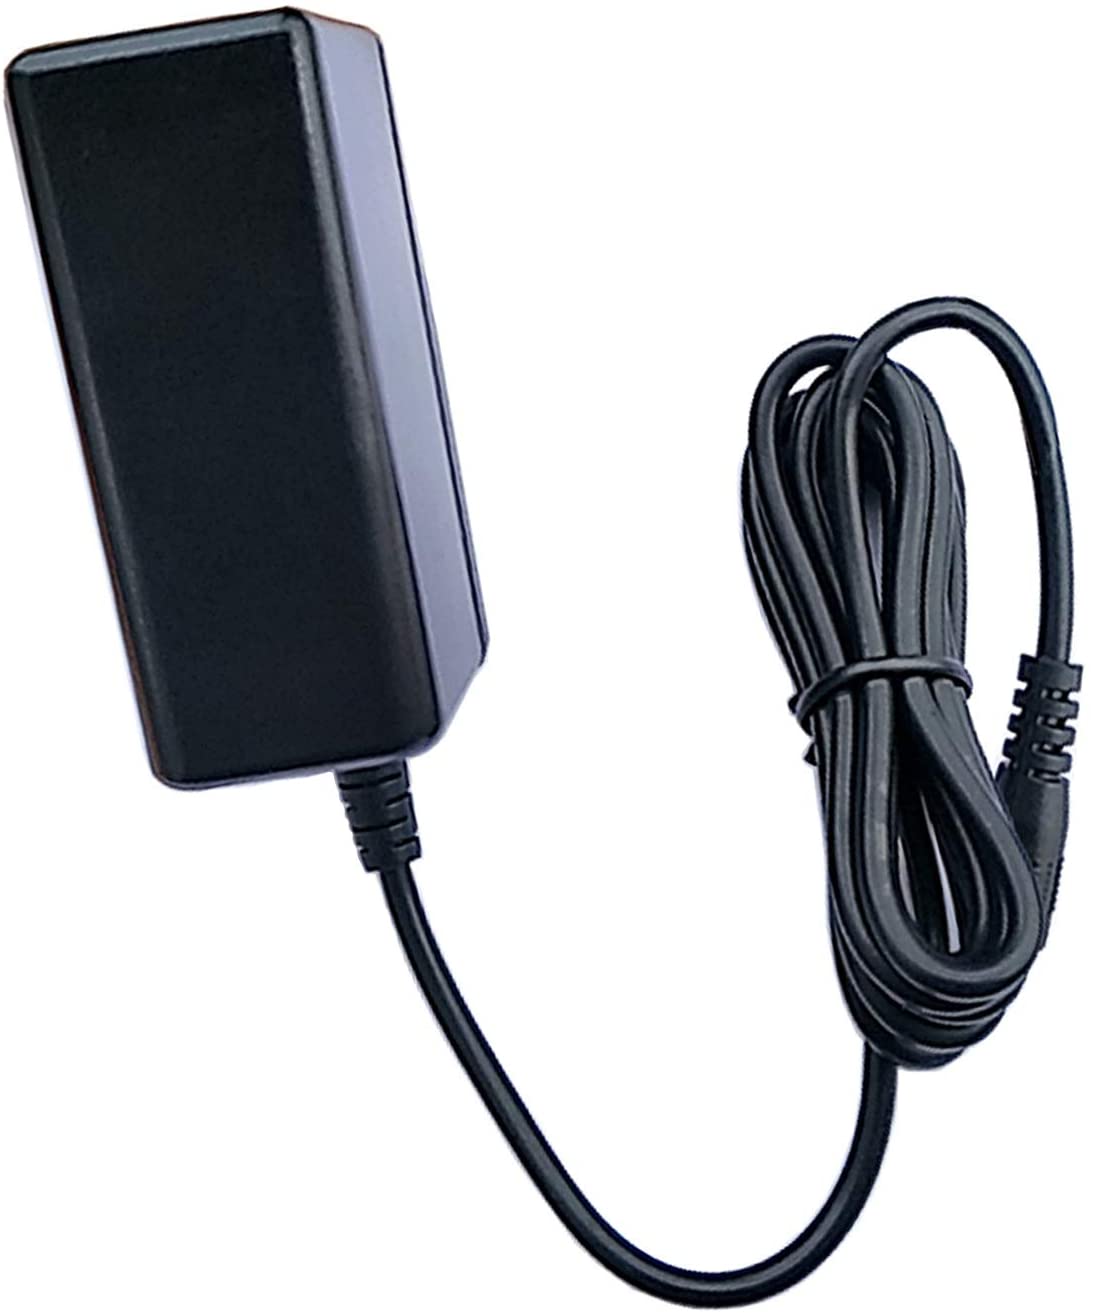 UPBRIGHT AC Adapter For LIQUIDVIDEO ADPV26A DVD Player Charger Power Supply Cord PSU - image 3 of 5